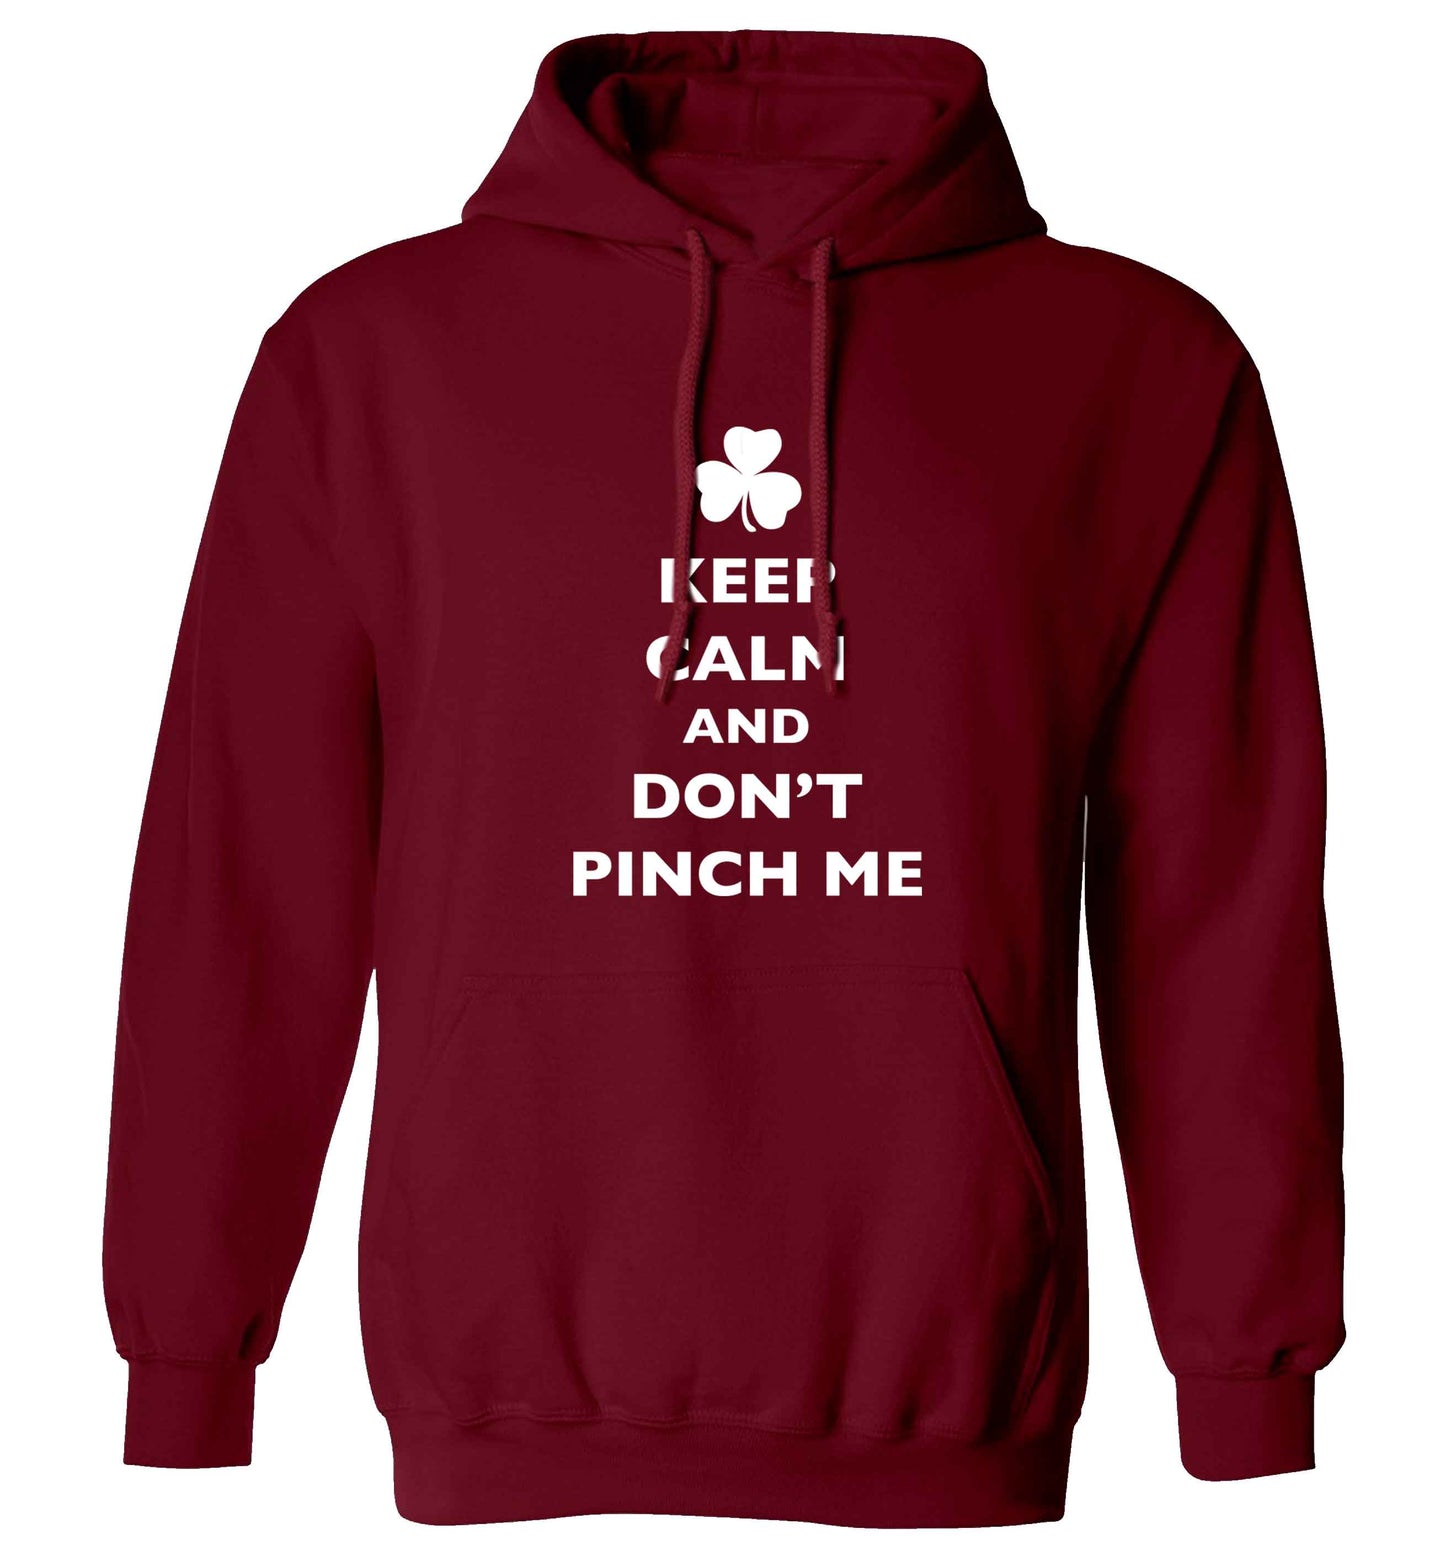 Keep calm and don't pinch me adults unisex maroon hoodie 2XL